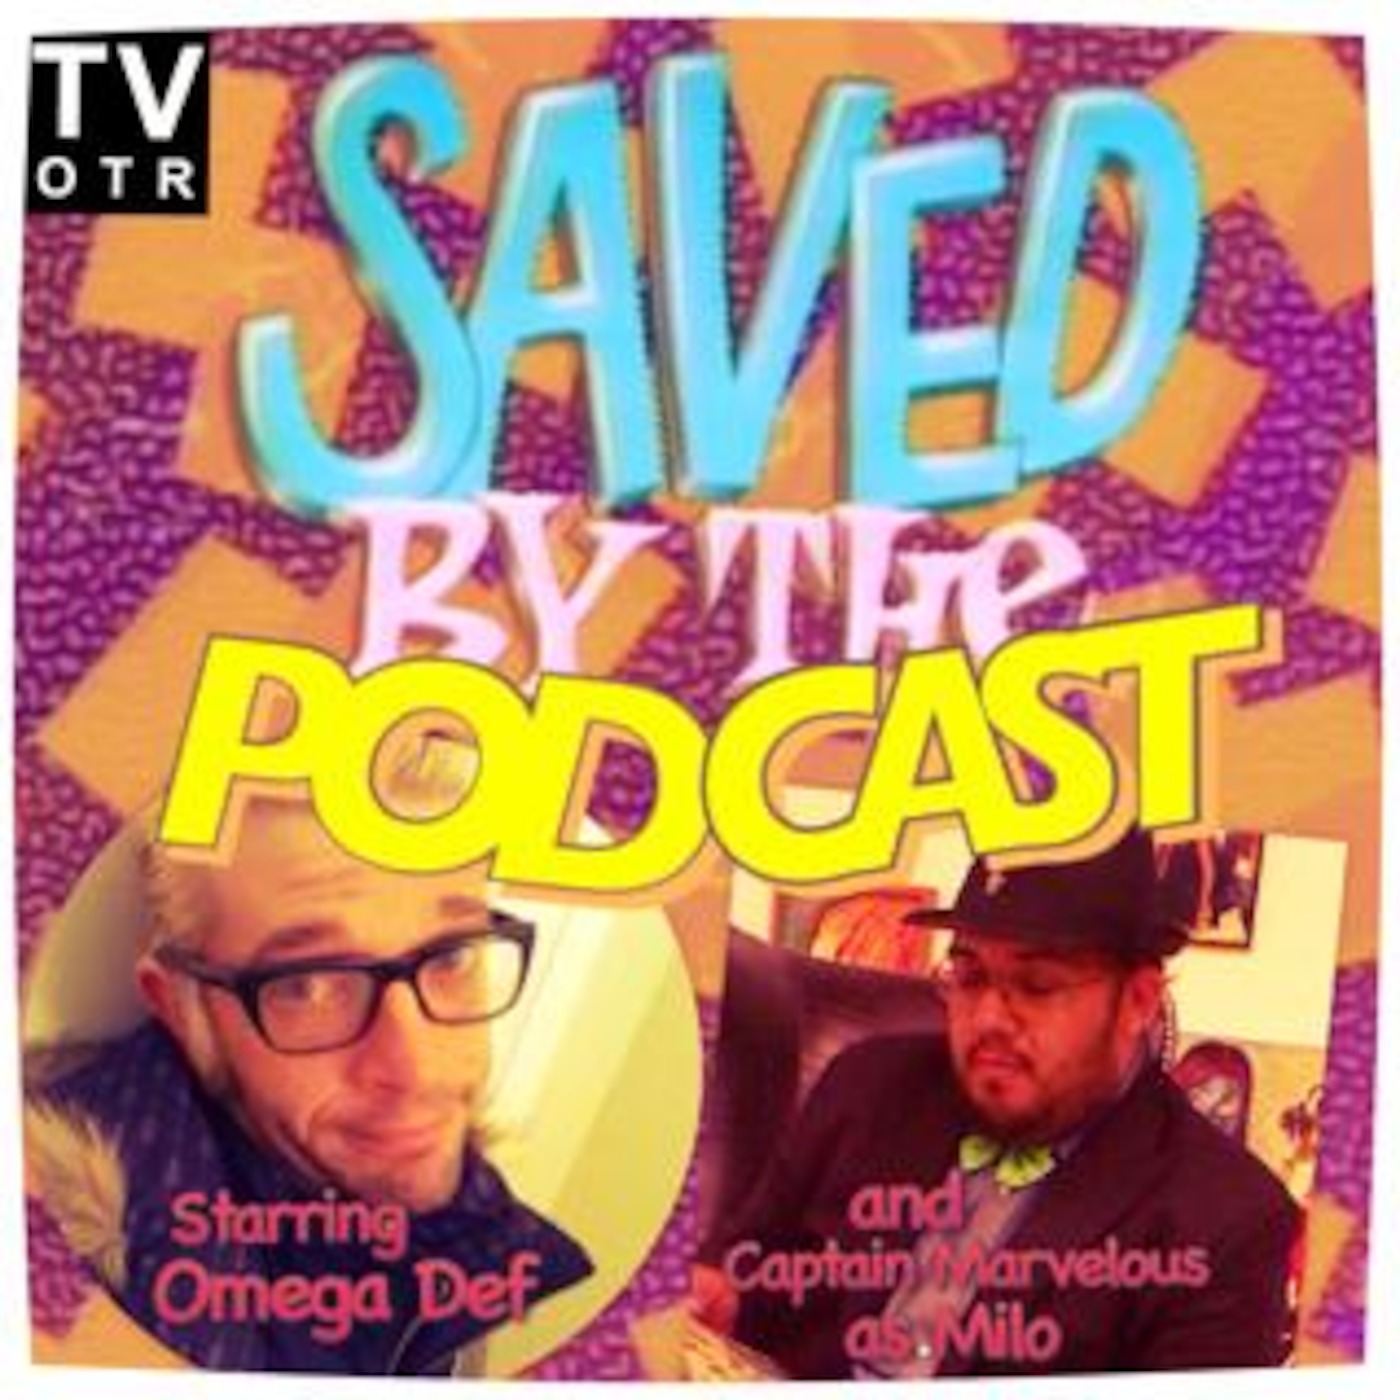 Saved by the podcast